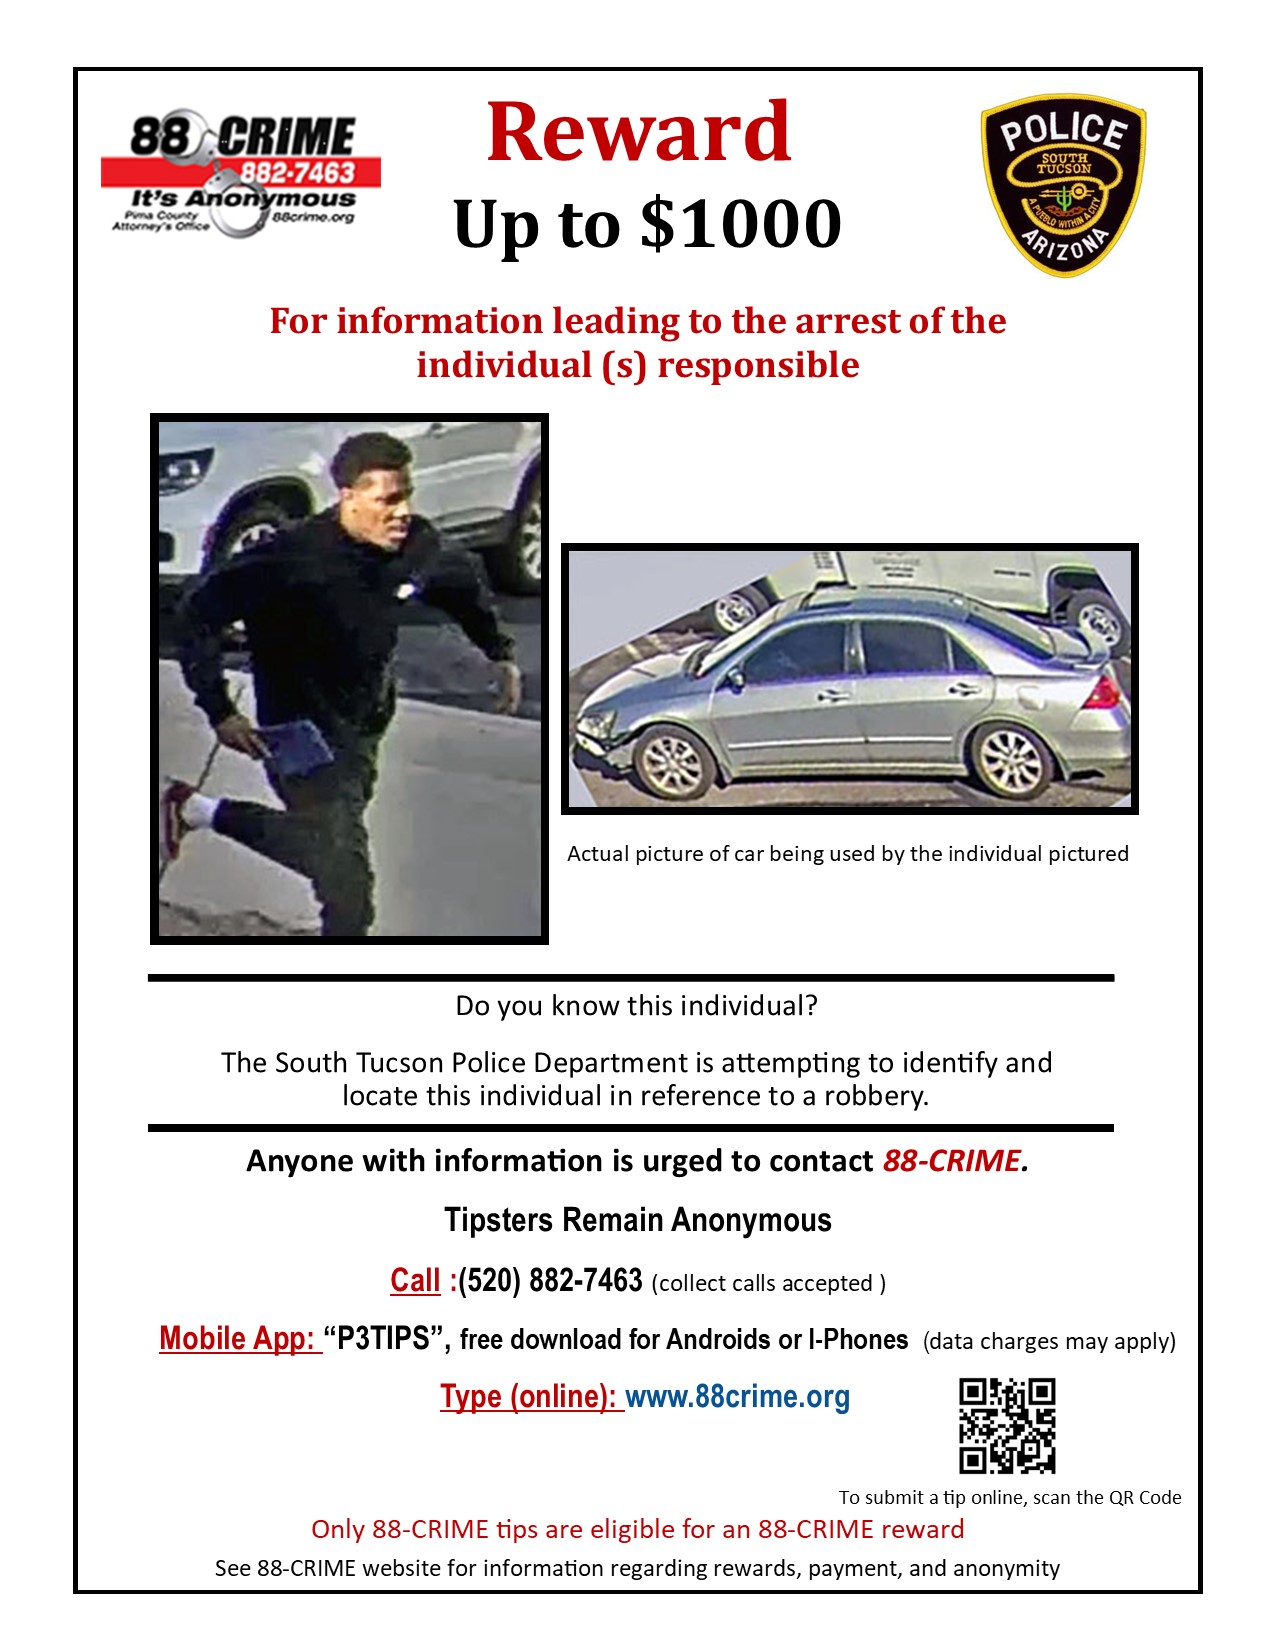 South Tucson Police Department Robbery